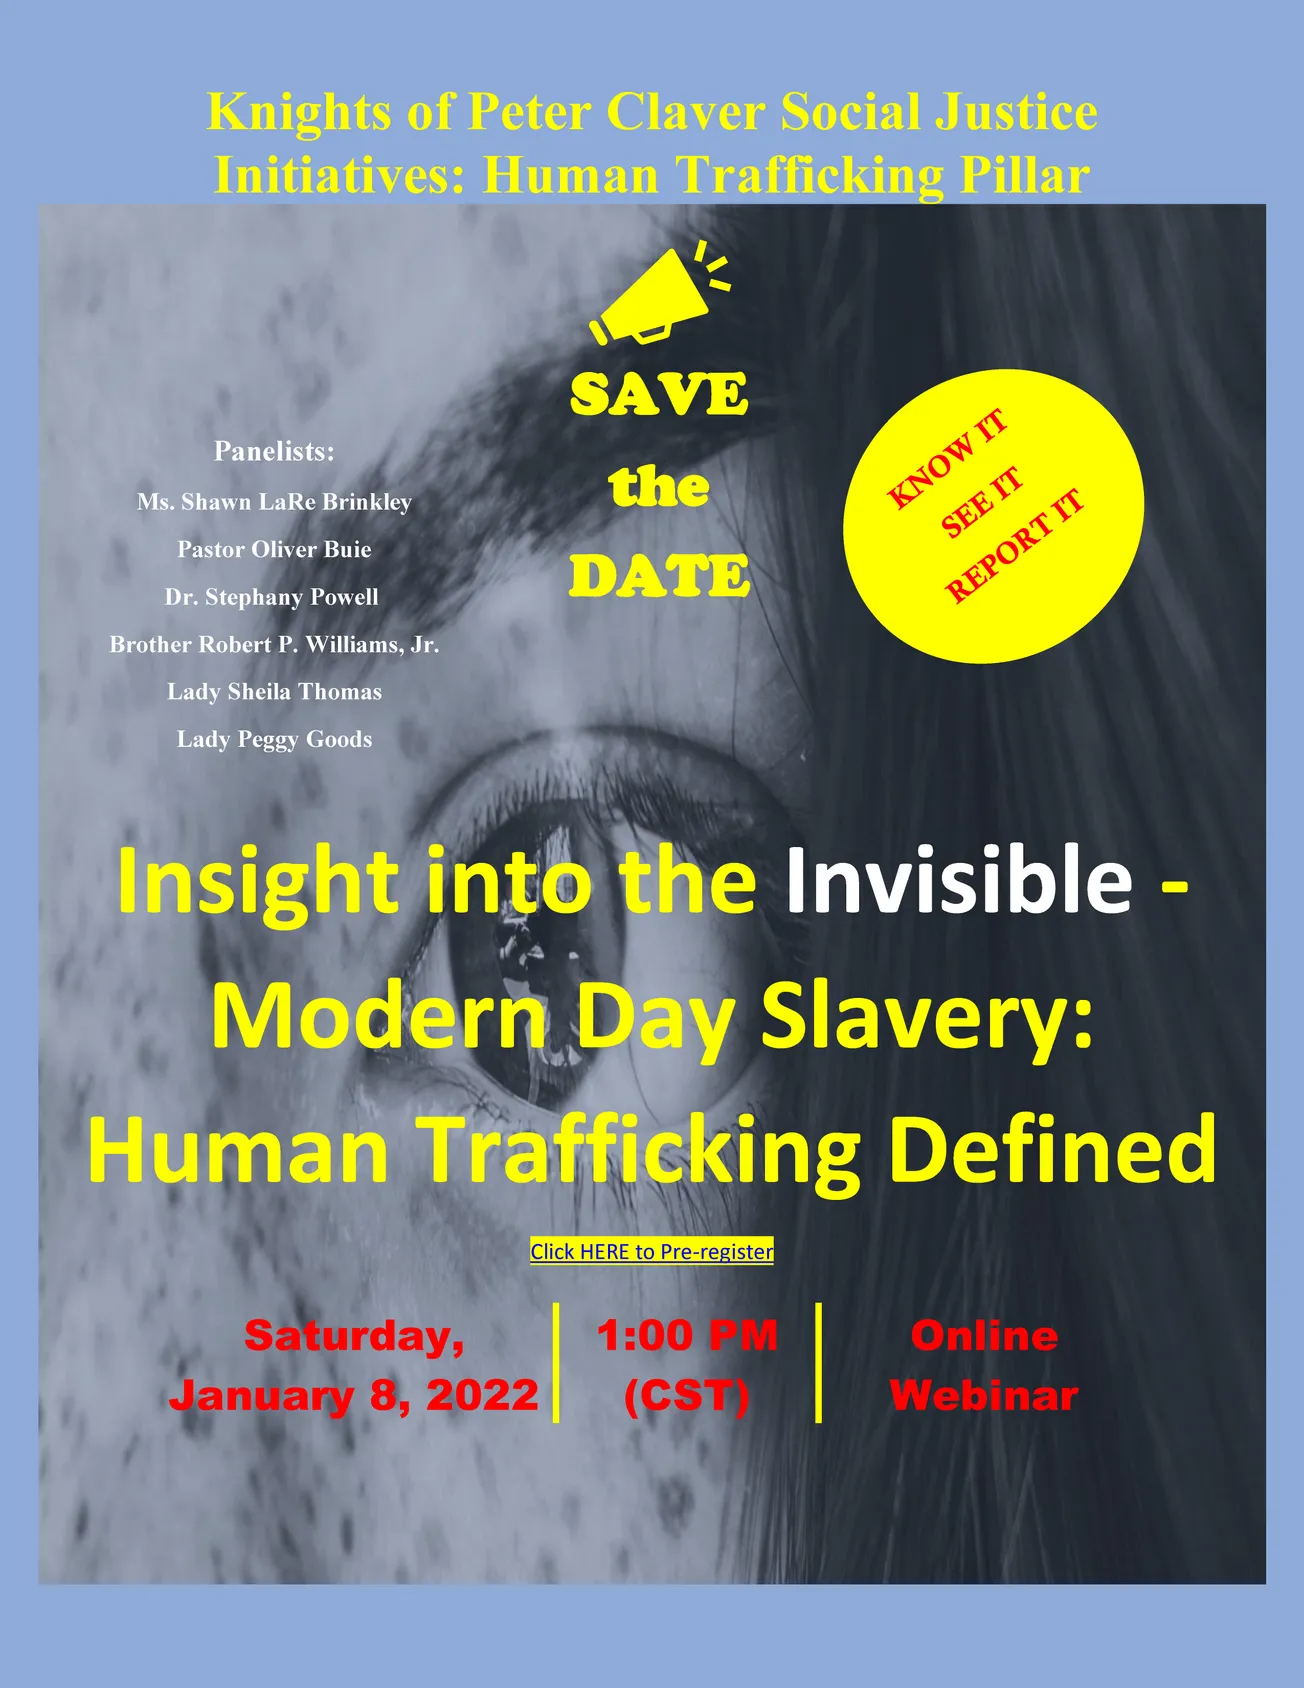 Knights of Peter Claver hosting webinar today on human trafficking